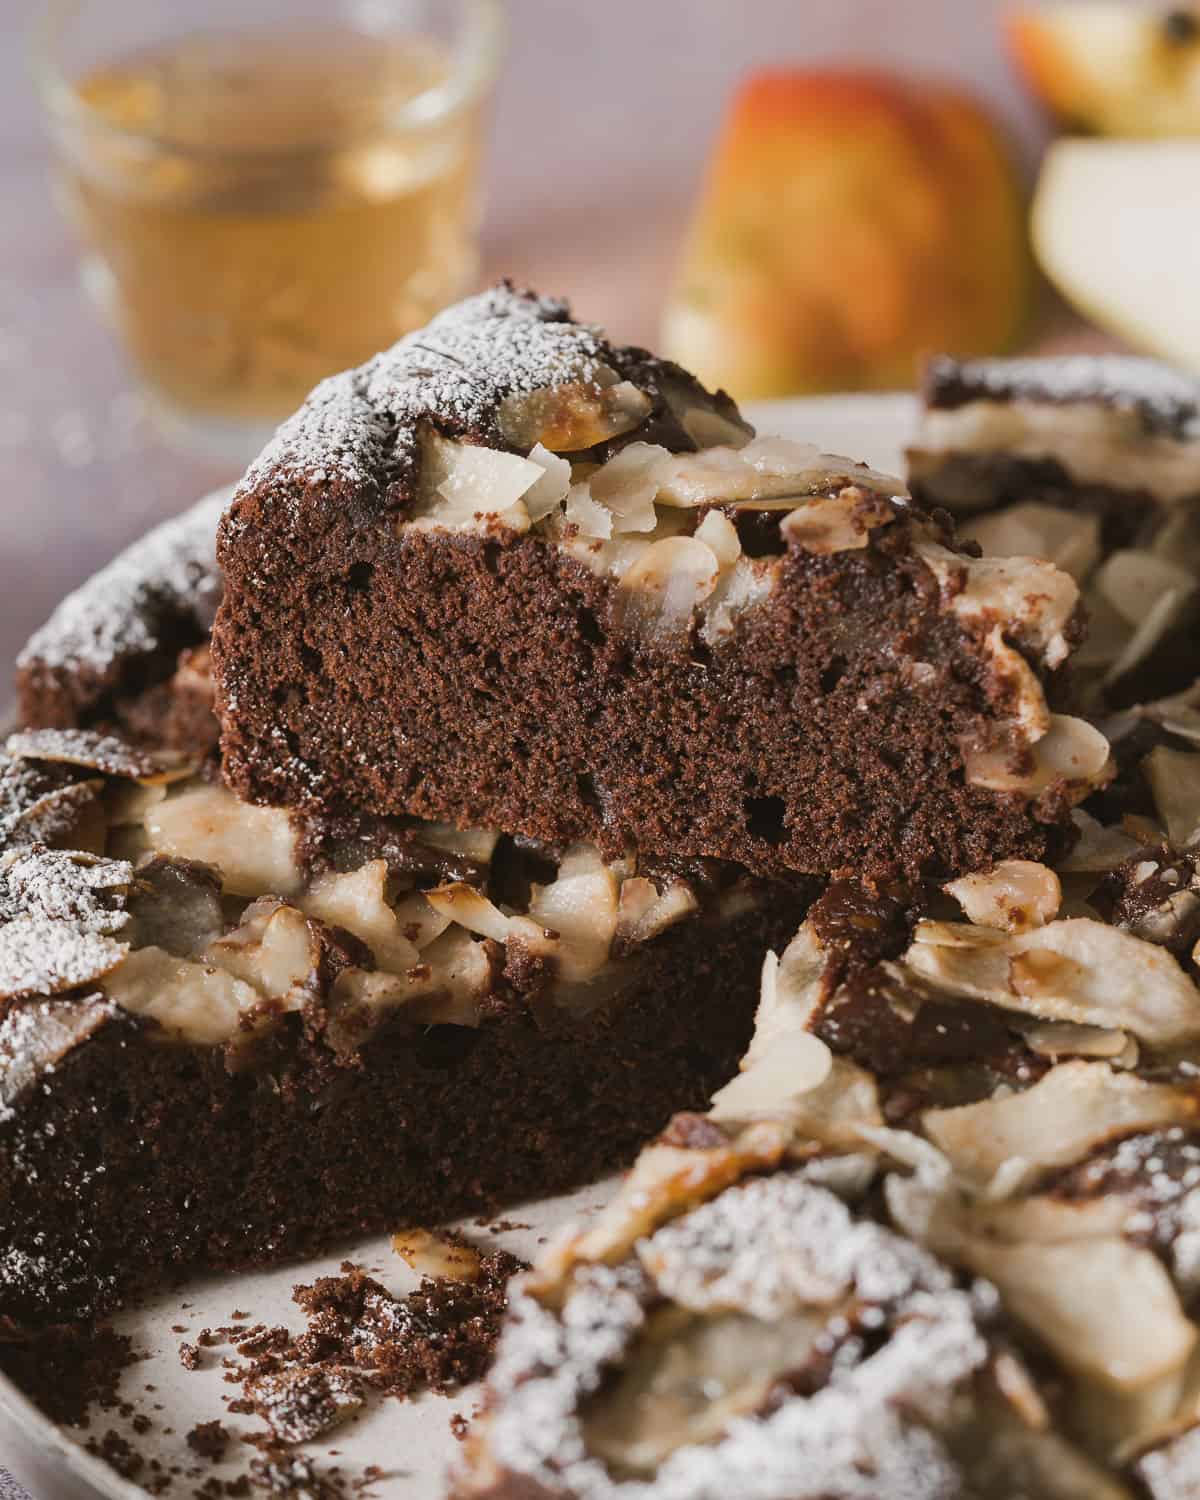 A Chocolate and Pear Cake in a pan from above on a grey rustic table. The cake is sliced and a slice is out of the pan. It shown the pears baked inside and almonds on top